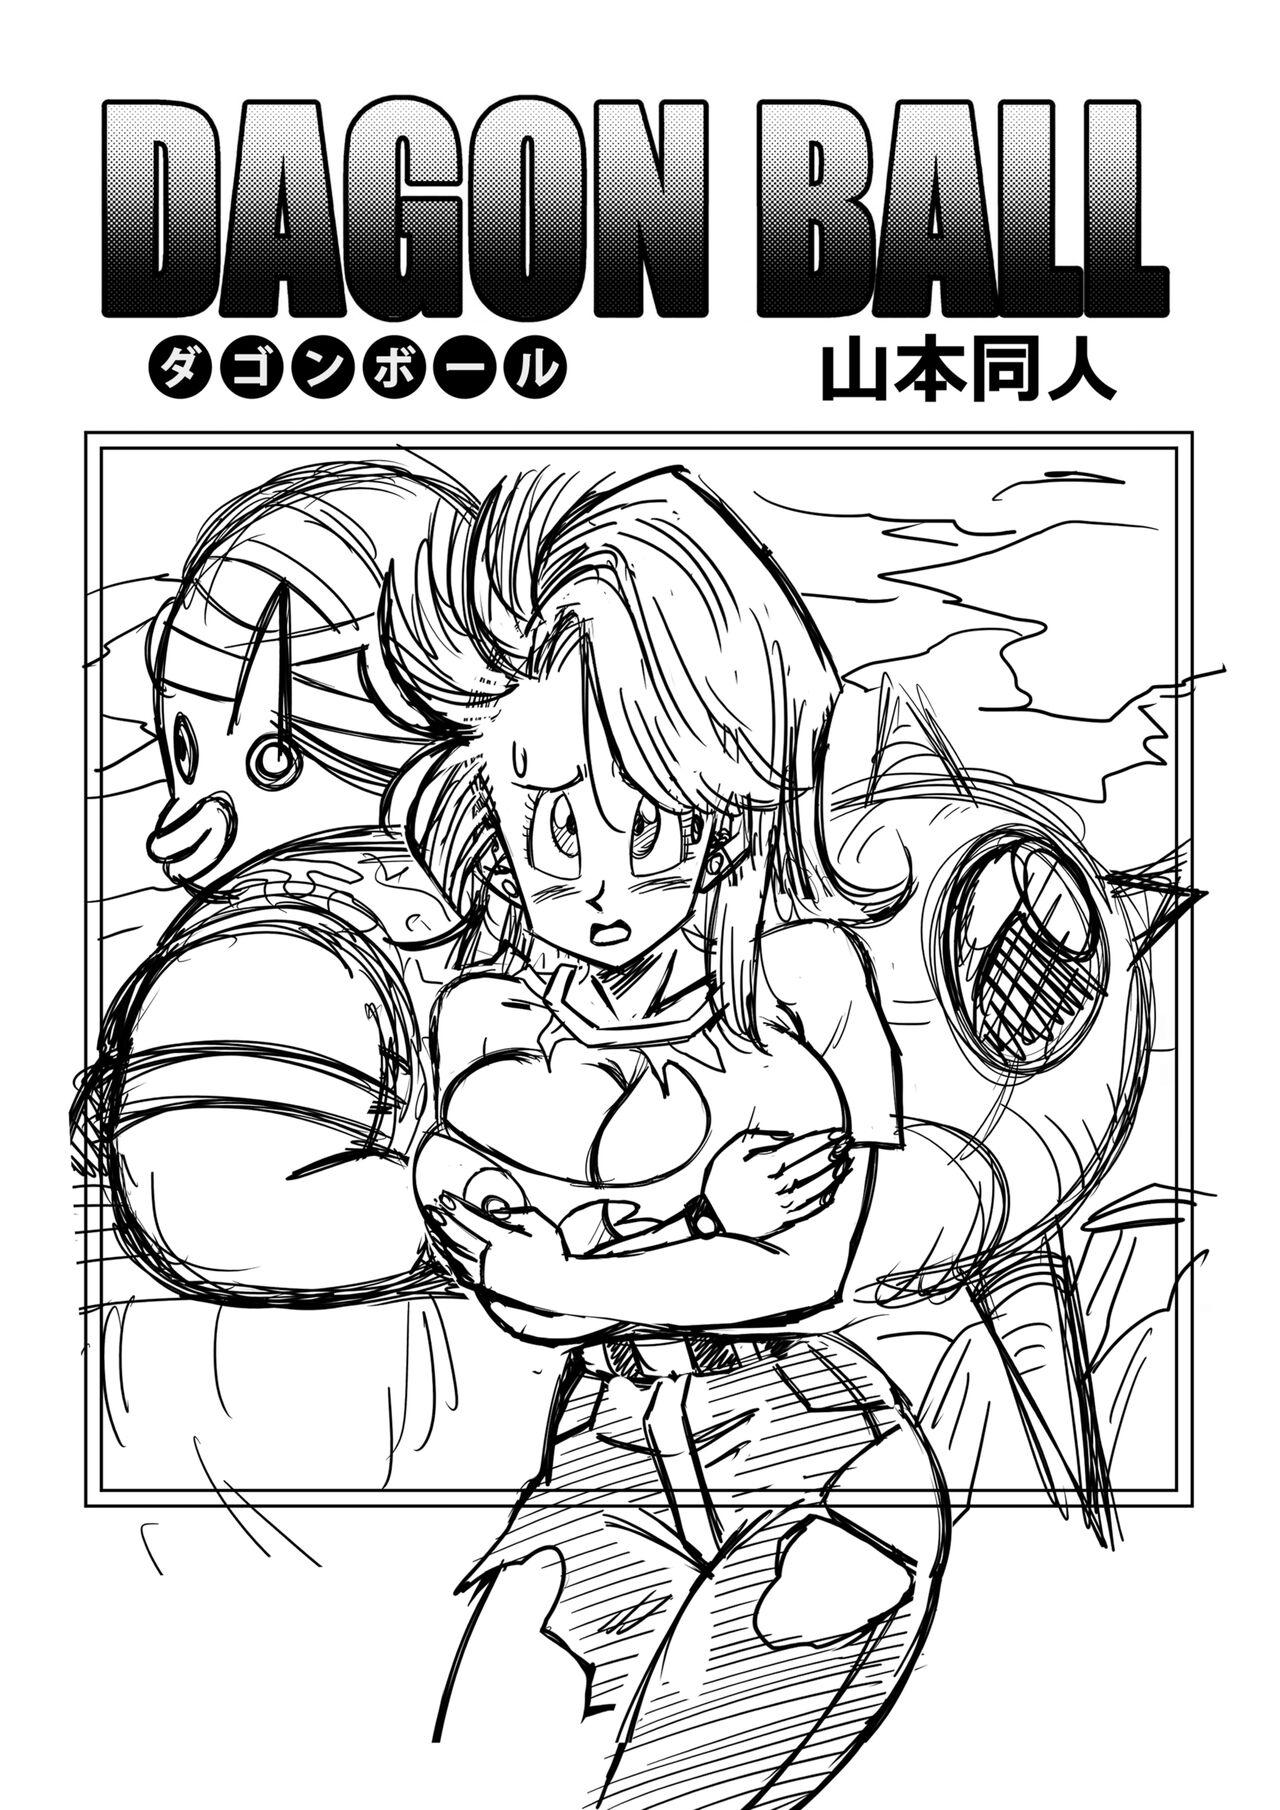 Cameltoe Bulma Meets Mr.Popo - Sex inside the Mysterious Spaceship! - Dragon ball z Daring - Page 2